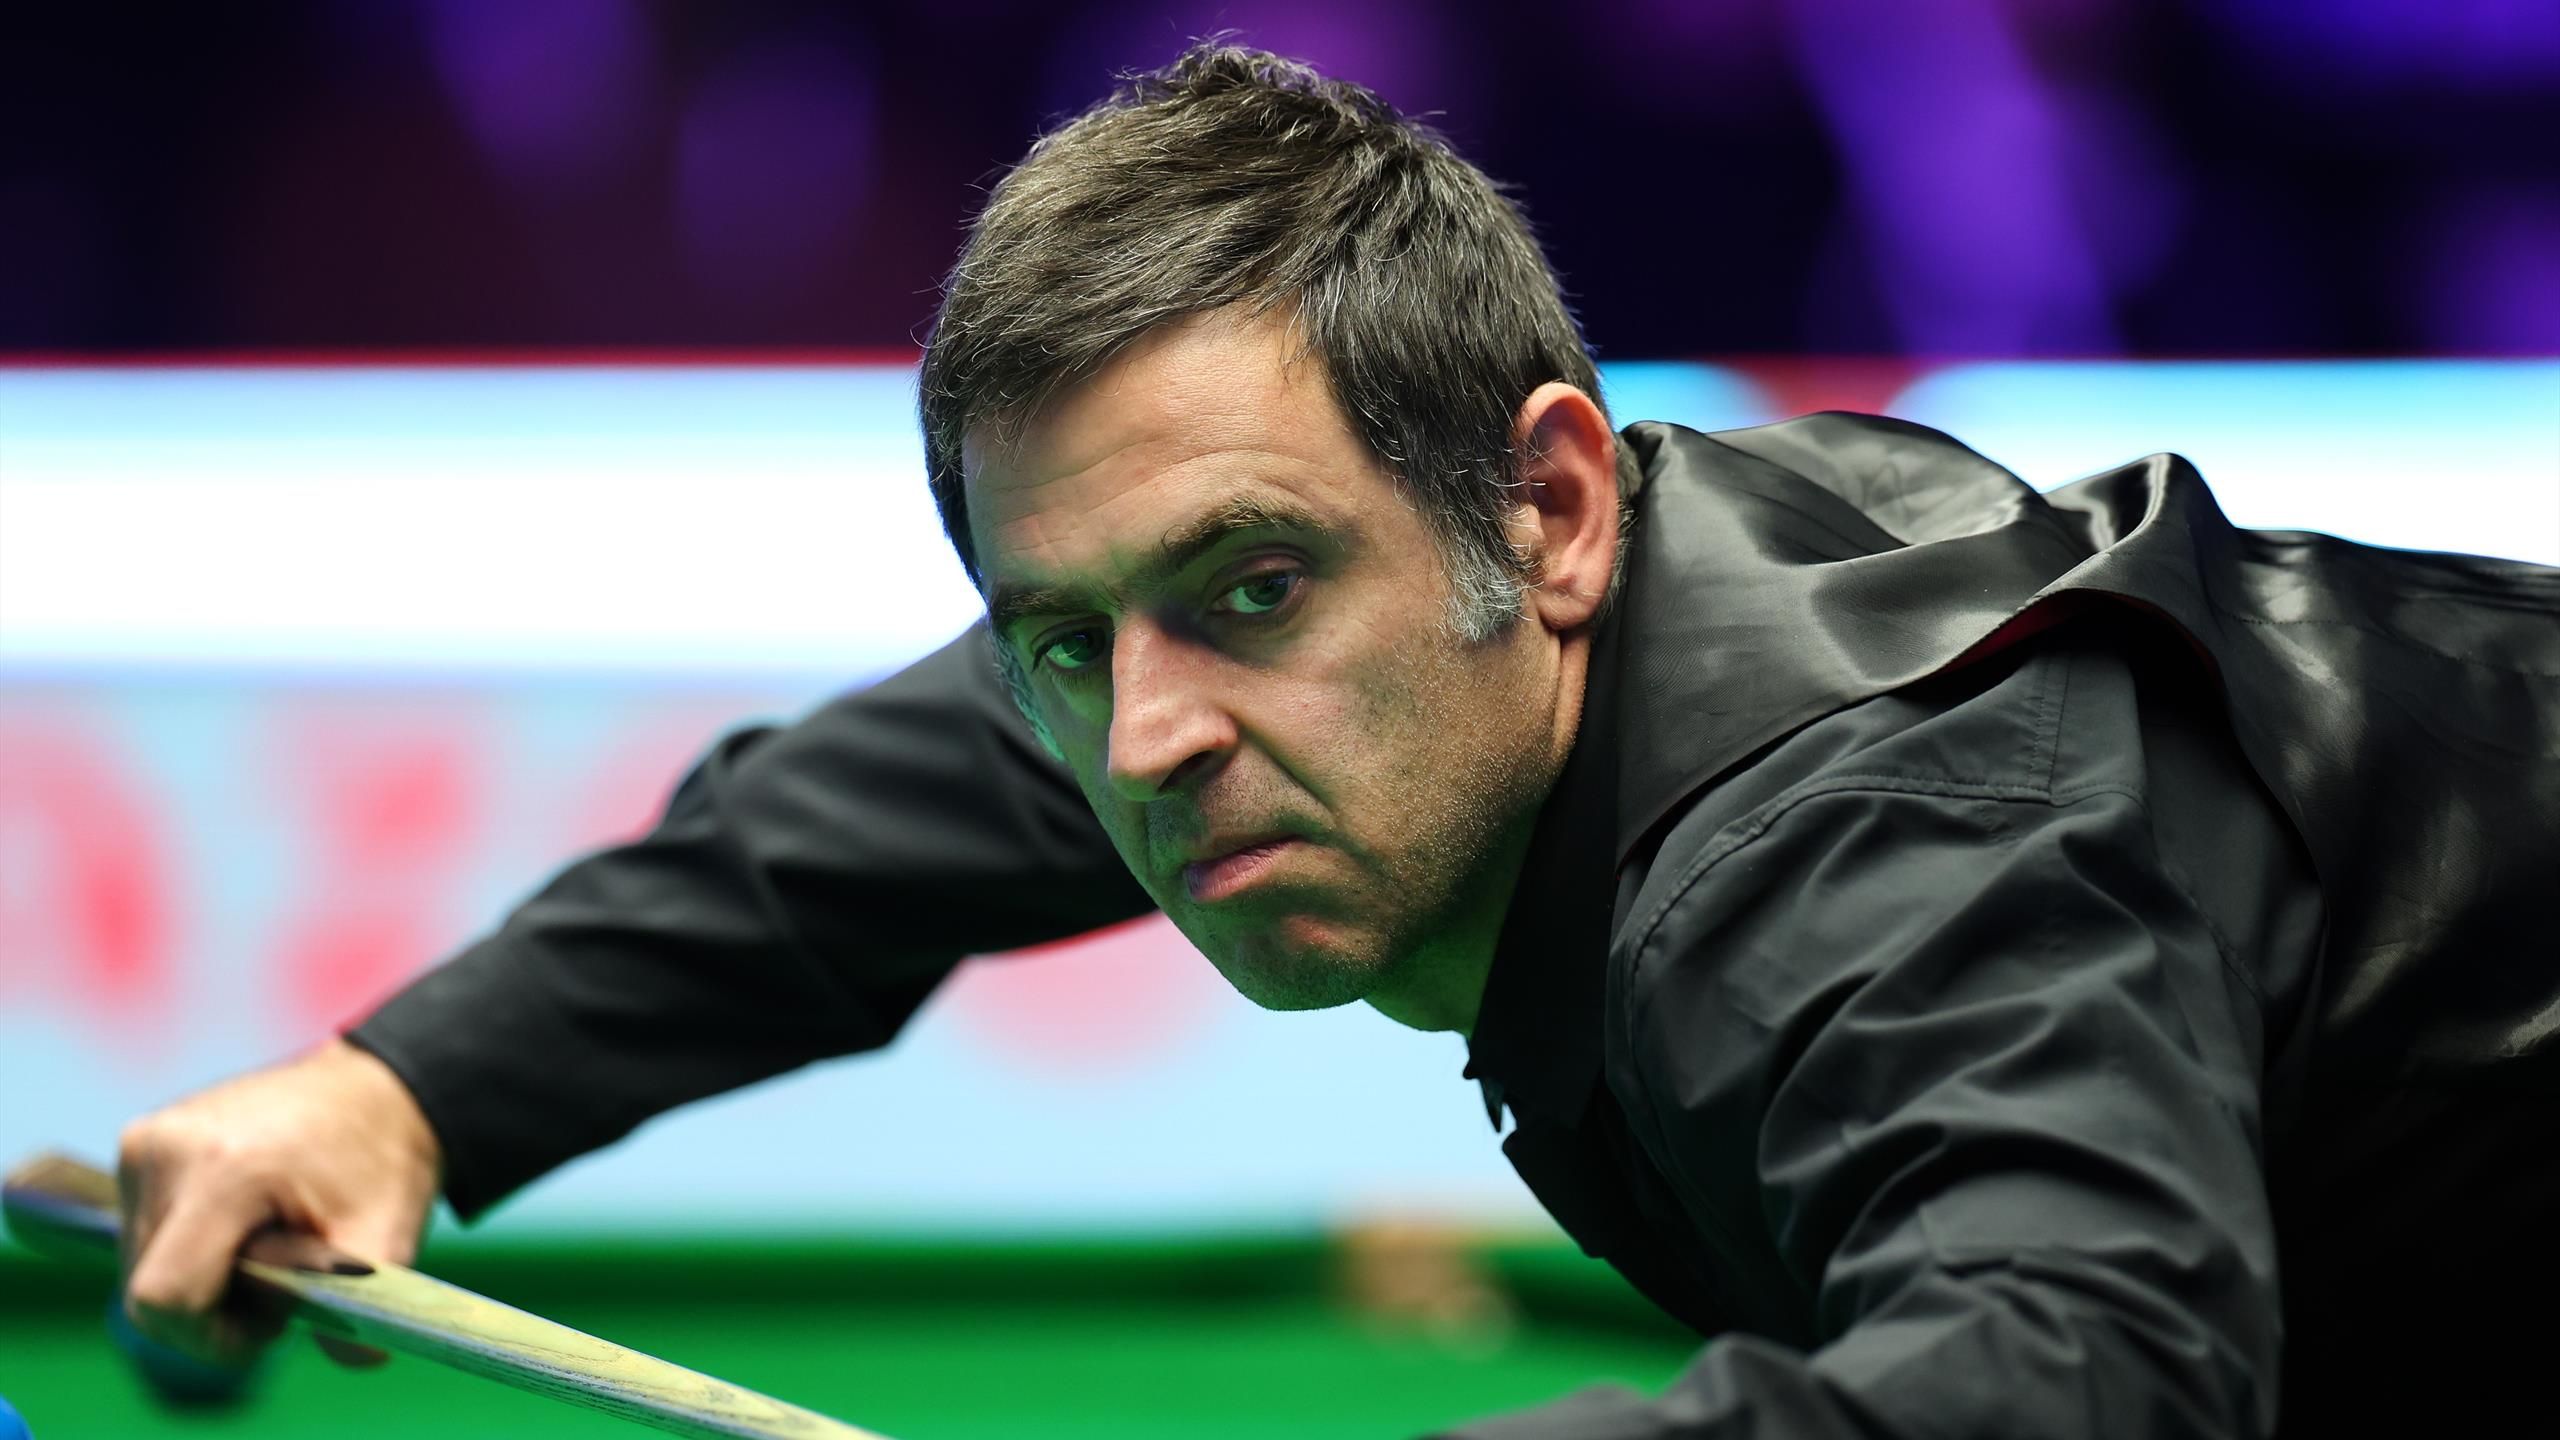 How to watch 2023 Welsh Open, draw, schedule, live stream, TV coverage with Ronnie OSullivan, Judd Trump in action